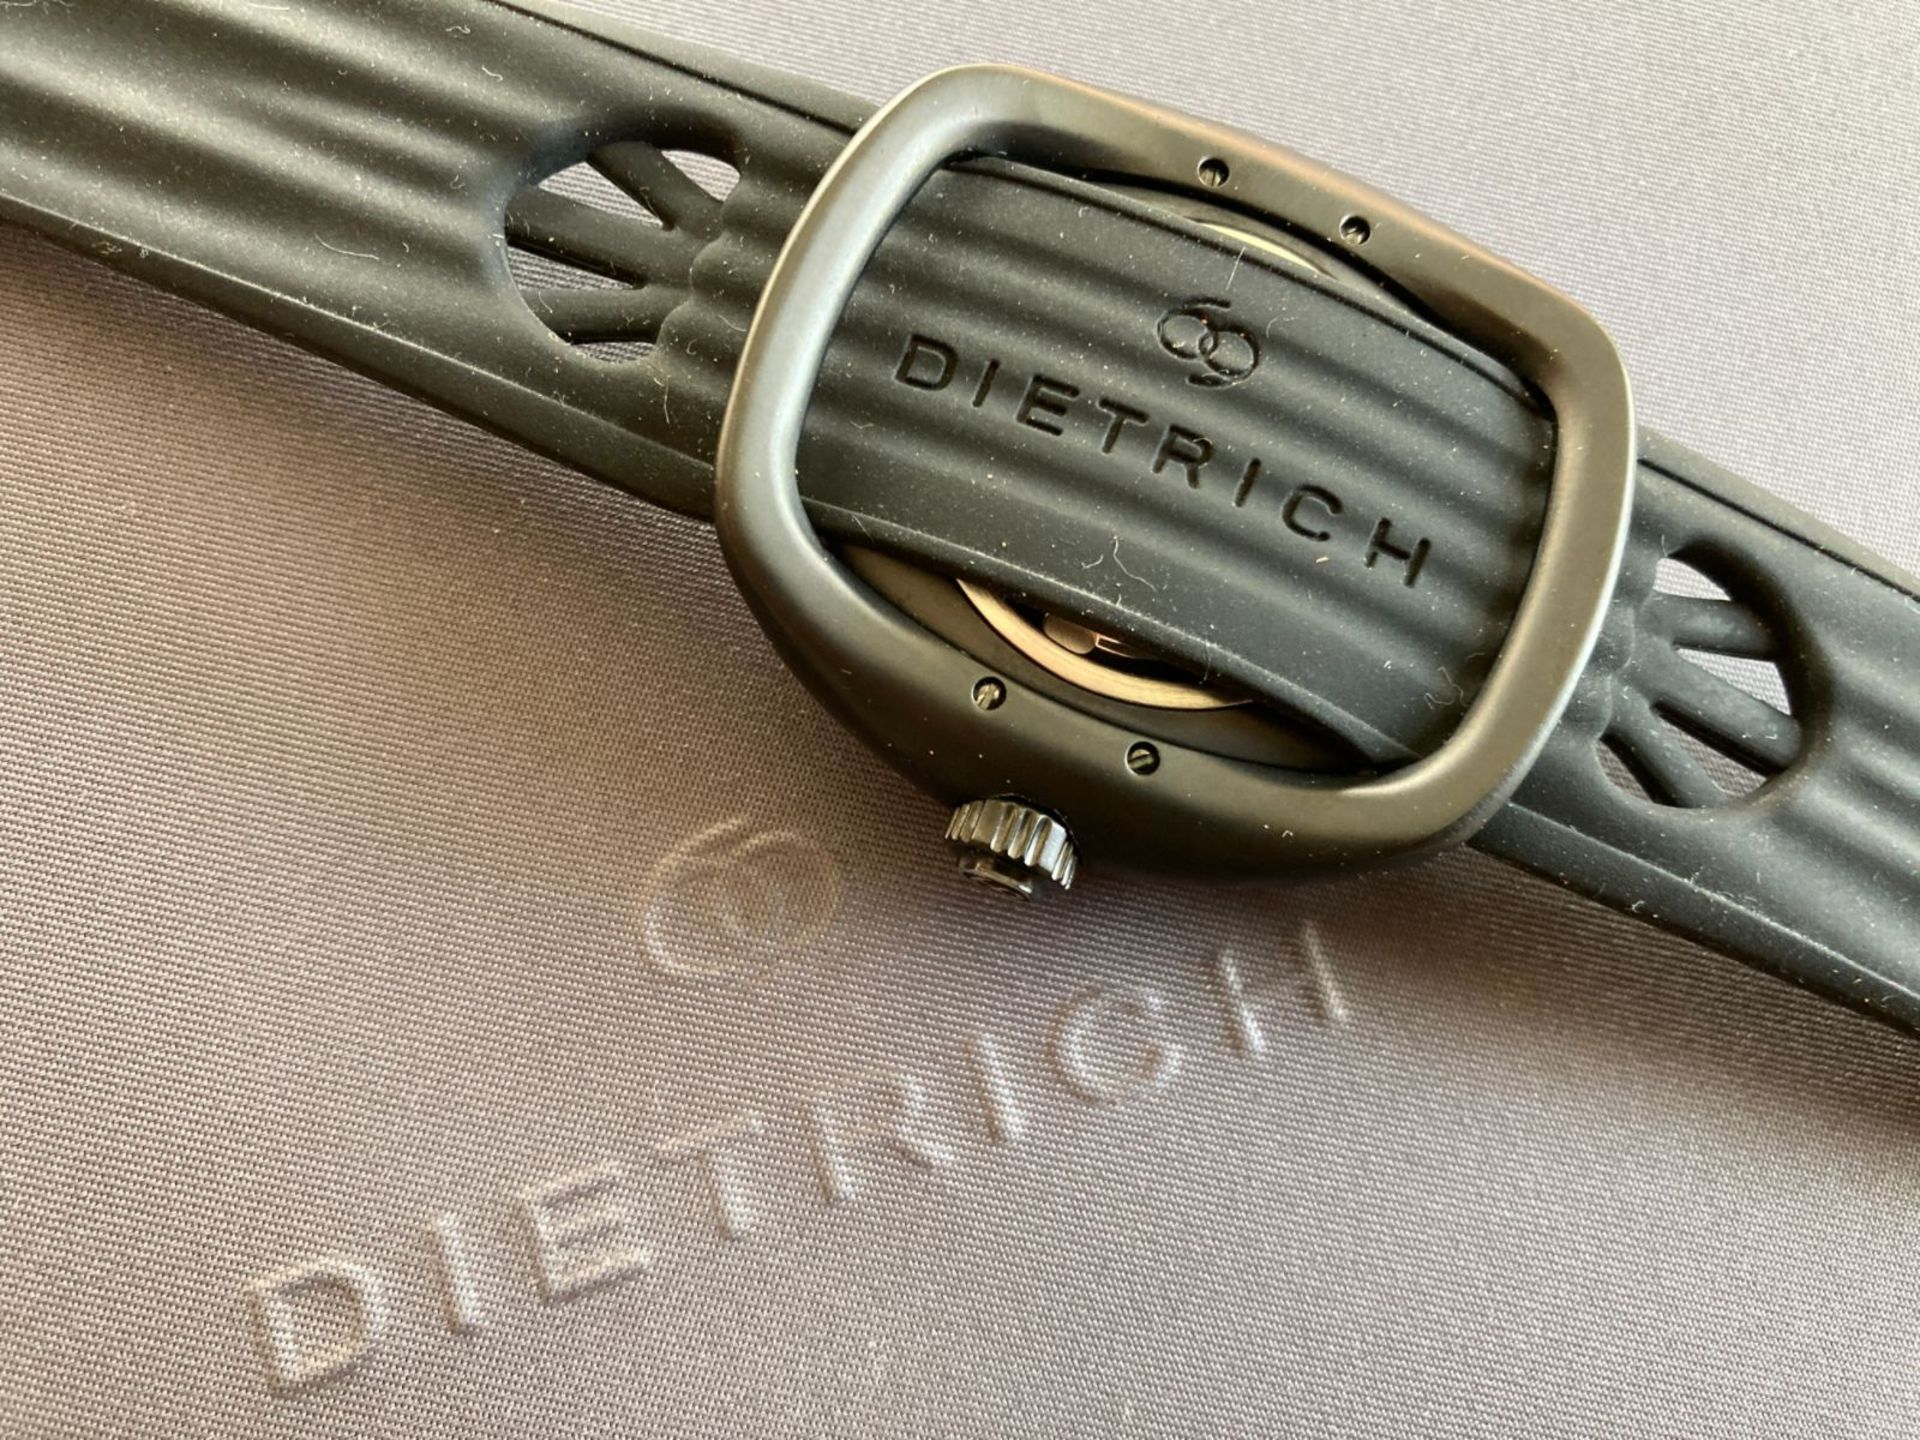 DIETRICH WATCH - BOXED WITH ORIGINAL EXTRAS - Image 5 of 6